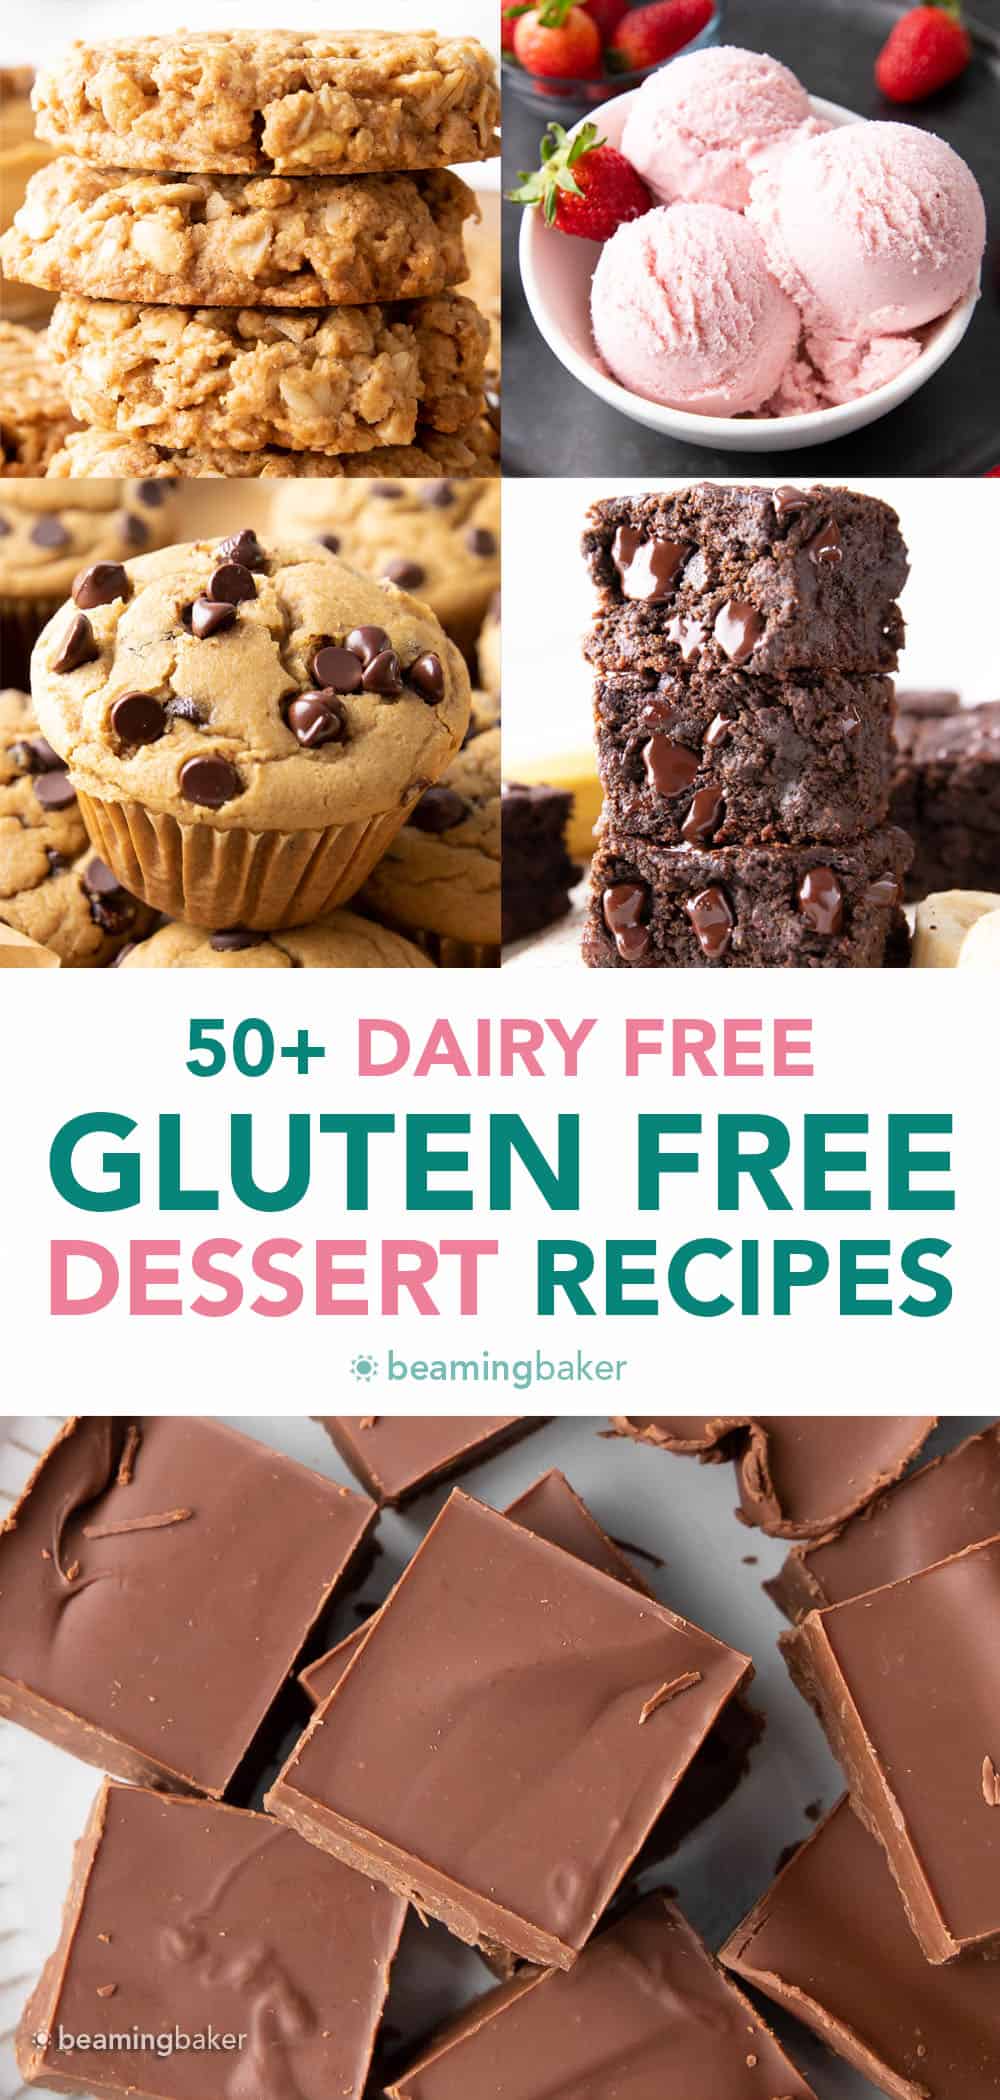 50 + Gluten Free Dairy Free Desserts (GF): the ultimate collection of delicious & easy gluten free dairy free desserts recipes for sweets lovers everywhere! My favorite gluten and dairy free desserts, all in one place. #GlutenFree #DairyFree #Desserts #GlutenFreeDairyFree | Recipes at BeamingBaker.com